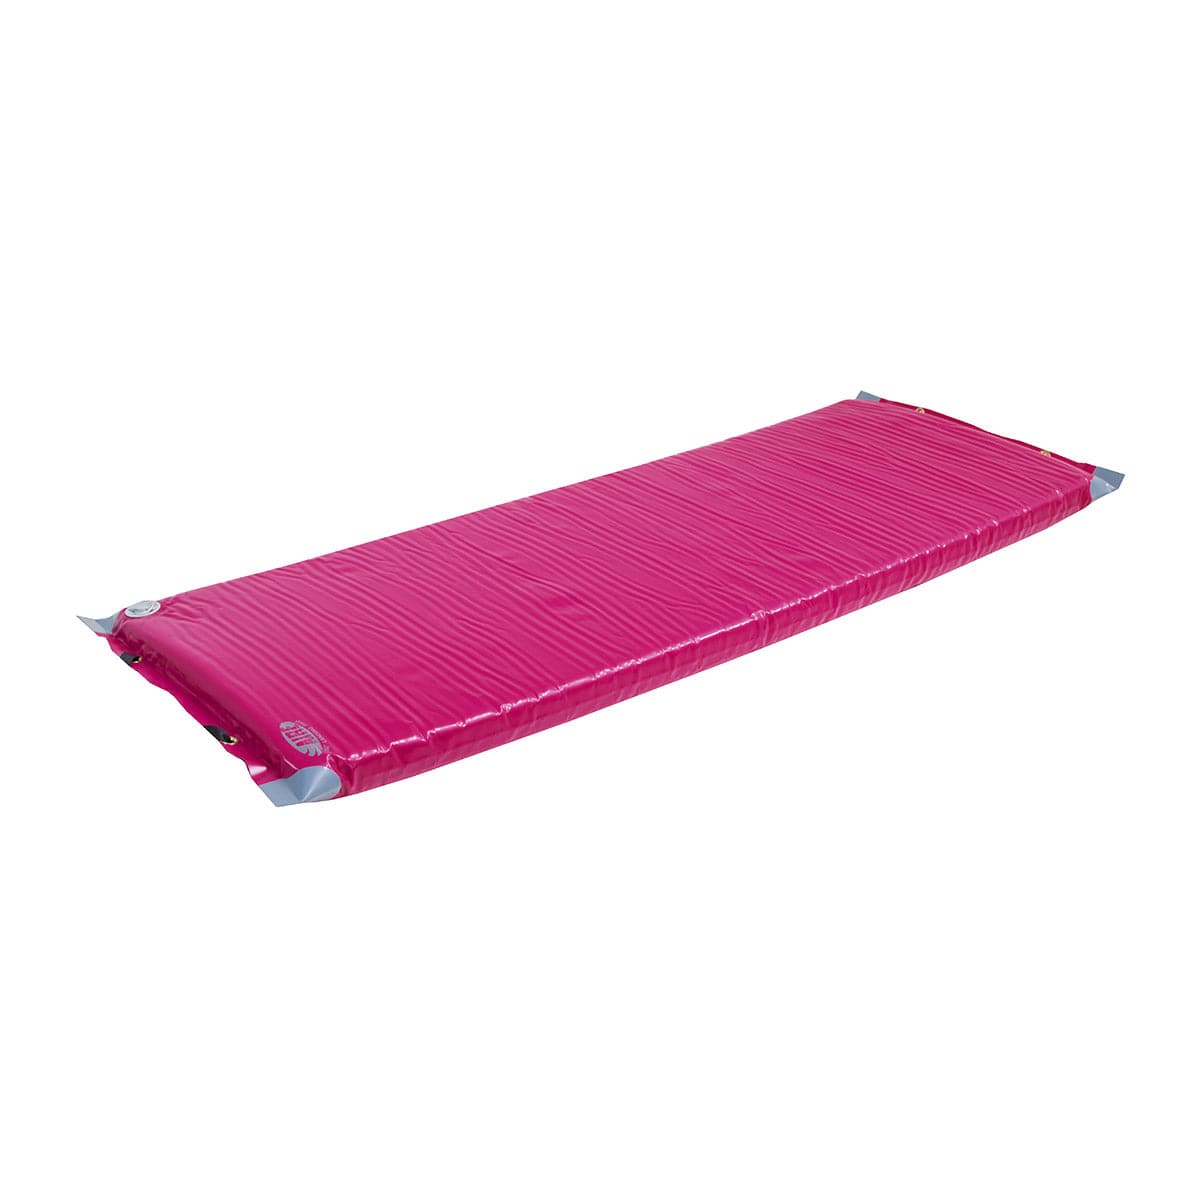 Featuring the Landing Pad Sleeping Pads paco pad, sleep pad manufactured by AIRE shown here from an eighth angle.